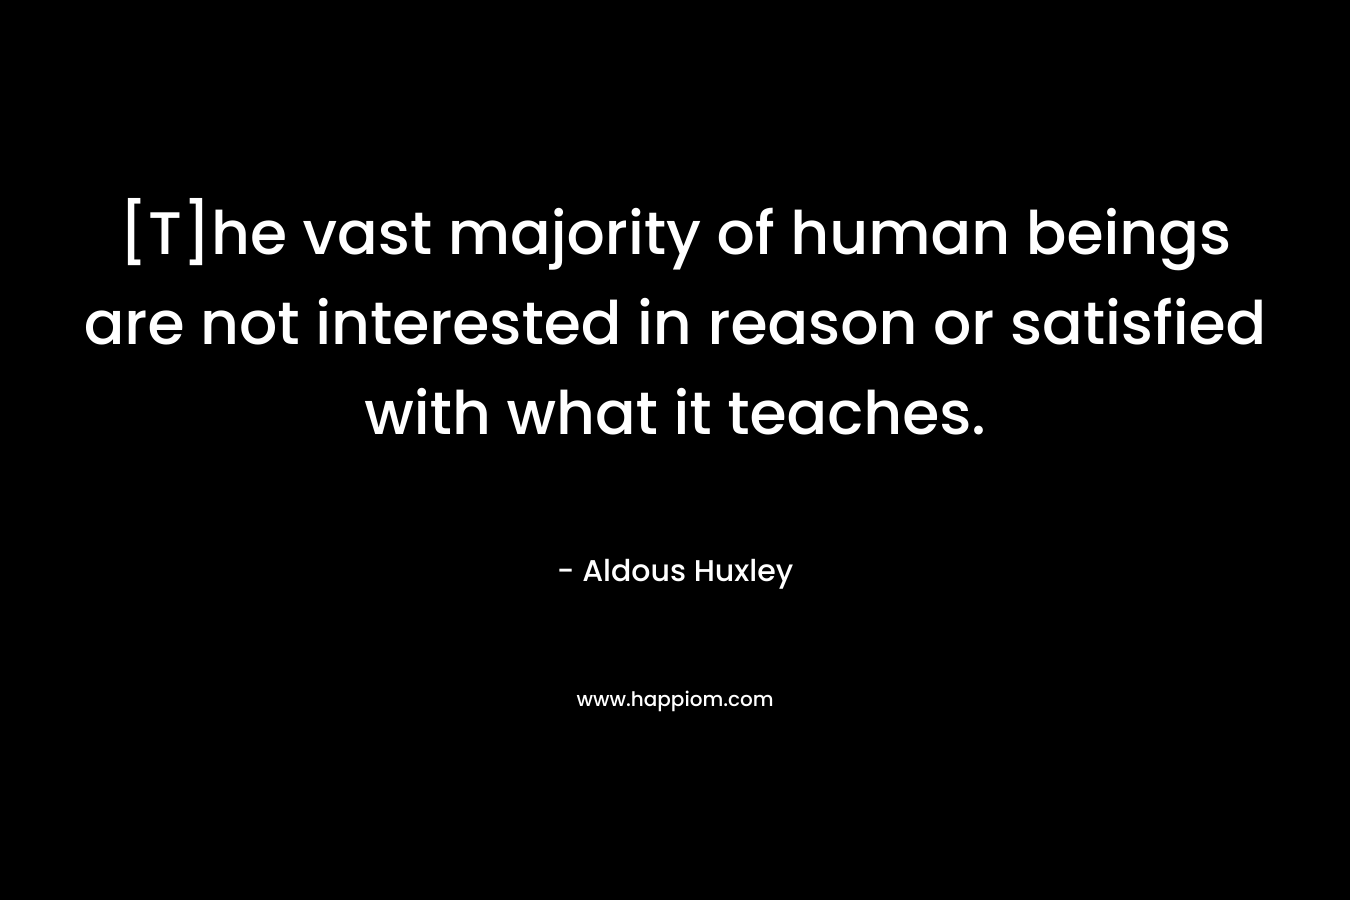 [T]he vast majority of human beings are not interested in reason or satisfied with what it teaches.